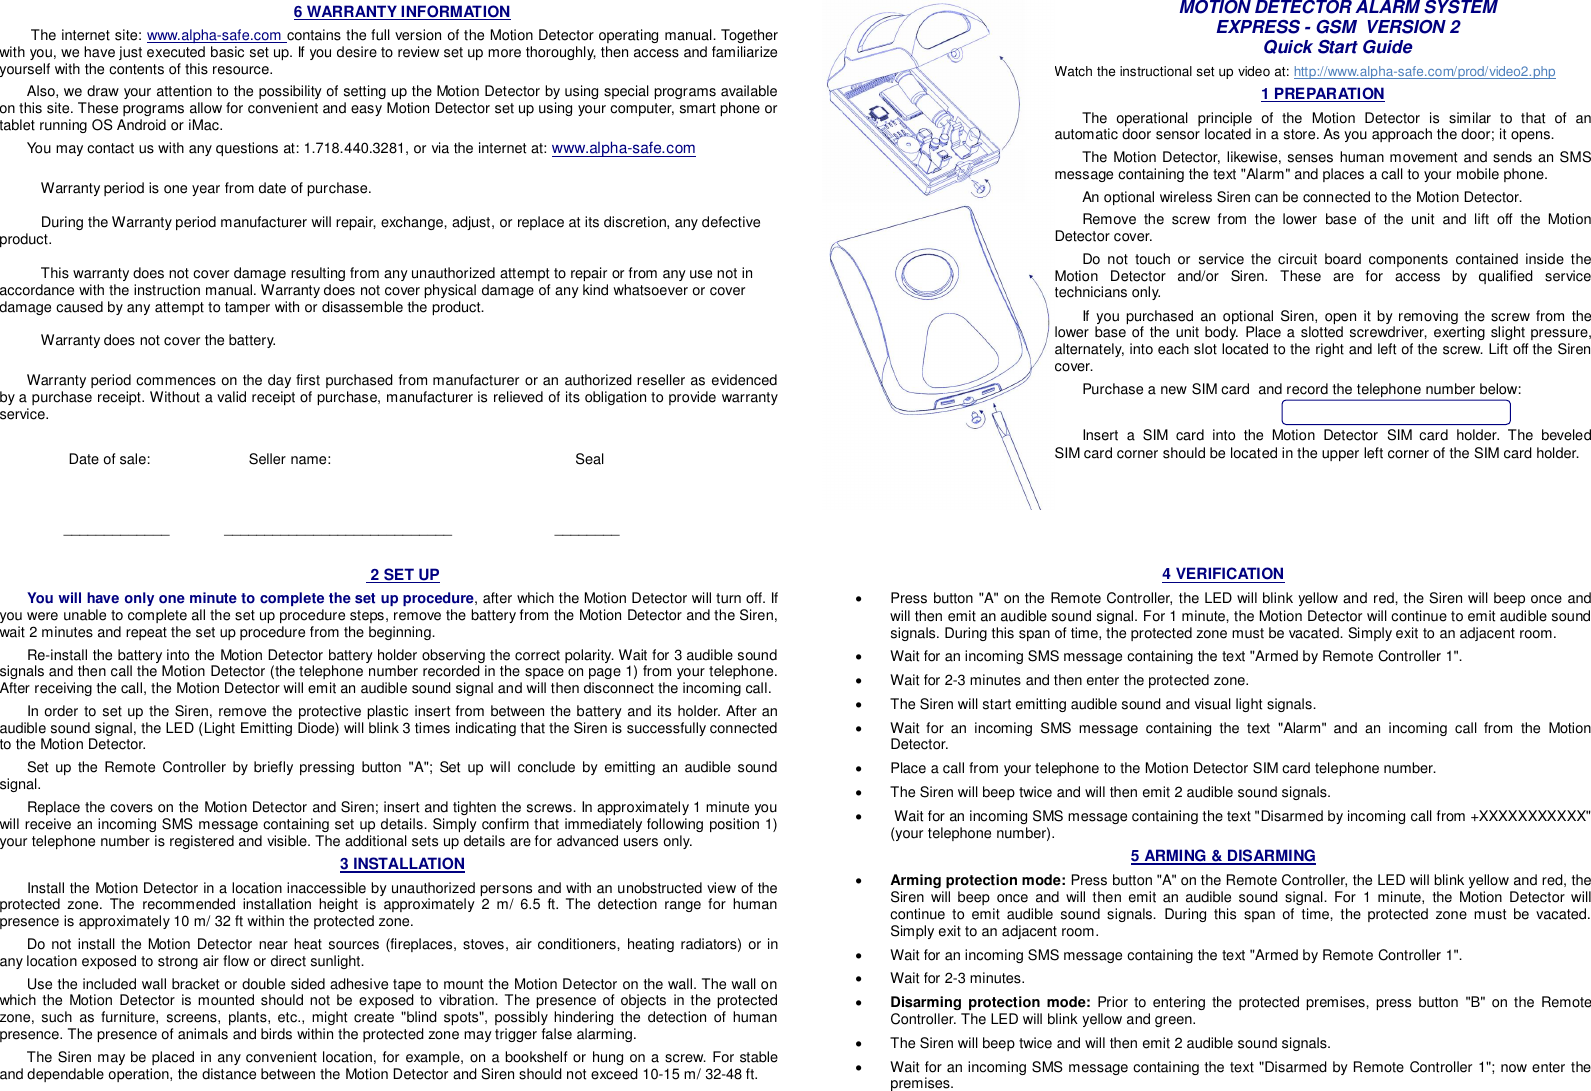 6 WARRANTY INFORMATION  The internet site: www.alpha-safe.com contains the full version of the Motion Detector operating manual. Together with you, we have just executed basic set up. If you desire to review set up more thoroughly, then access and familiarize yourself with the contents of this resource. Also, we draw your attention to the possibility of setting up the Motion Detector by using special programs available on this site. These programs allow for convenient and easy Motion Detector set up using your computer, smart phone or tablet running OS Android or iMac. You may contact us with any questions at: 1.718.440.3281, or via the internet at: www.alpha-safe.com         Warranty period is one year from date of purchase.   During the Warranty period manufacturer will repair, exchange, adjust, or replace at its discretion, any defective product.    This warranty does not cover damage resulting from any unauthorized attempt to repair or from any use not in accordance with the instruction manual. Warranty does not cover physical damage of any kind whatsoever or cover damage caused by any attempt to tamper with or disassemble the product.   Warranty does not cover the battery.   Warranty period commences on the day first purchased from manufacturer or an authorized reseller as evidenced by a purchase receipt. Without a valid receipt of purchase, manufacturer is relieved of its obligation to provide warranty service.            Date of sale:            Seller name:               Seal           _____________      ____________________________                         ________  MOTION DETECTOR ALARM SYSTEM EXPRESS - GSM  VERSION 2 Quick Start Guide Watch the instructional set up video at: http://www.alpha-safe.com/prod/video2.php 1 PREPARATION The operational principle of the Motion Detector is similar to that of an automatic door sensor located in a store. As you approach the door; it opens.  The Motion Detector, likewise, senses human movement and sends an SMS message containing the text &quot;Alarm&quot; and places a call to your mobile phone.  An optional wireless Siren can be connected to the Motion Detector. Remove the screw from the lower base of the unit and lift off the Motion Detector cover. Do not touch or service the circuit board components contained inside the Motion Detector and/or Siren. These are for access by qualified service technicians only. If you purchased an optional Siren, open it by removing the screw from the lower base of the unit body. Place a slotted screwdriver, exerting slight pressure, alternately, into each slot located to the right and left of the screw. Lift off the Siren cover.  Purchase a new SIM card  and record the telephone number below:                                          Insert a SIM card into the Motion Detector SIM card  holder.  The  beveled          SIM card corner should be located in the upper left corner of the SIM card holder.  2 SET UP You will have only one minute to complete the set up procedure, after which the Motion Detector will turn off. If you were unable to complete all the set up procedure steps, remove the battery from the Motion Detector and the Siren, wait 2 minutes and repeat the set up procedure from the beginning. Re-install the battery into the Motion Detector battery holder observing the correct polarity. Wait for 3 audible sound signals and then call the Motion Detector (the telephone number recorded in the space on page 1) from your telephone. After receiving the call, the Motion Detector will emit an audible sound signal and will then disconnect the incoming call. In order to set up the Siren, remove the protective plastic insert from between the battery and its holder. After an audible sound signal, the LED (Light Emitting Diode) will blink 3 times indicating that the Siren is successfully connected to the Motion Detector. Set up the Remote Controller by briefly pressing button &quot;A&quot;; Set up will conclude by emitting an audible sound signal. Replace the covers on the Motion Detector and Siren; insert and tighten the screws. In approximately 1 minute you will receive an incoming SMS message containing set up details. Simply confirm that immediately following position 1) your telephone number is registered and visible. The additional sets up details are for advanced users only.  3 INSTALLATION Install the Motion Detector in a location inaccessible by unauthorized persons and with an unobstructed view of the protected zone. The recommended installation height is approximately 2 m/ 6.5 ft. The detection range for human presence is approximately 10 m/ 32 ft within the protected zone. Do not install the Motion Detector near heat sources (fireplaces, stoves, air conditioners, heating radiators) or in any location exposed to strong air flow or direct sunlight. Use the included wall bracket or double sided adhesive tape to mount the Motion Detector on the wall. The wall on which the Motion Detector is mounted should not be exposed to vibration. The presence of objects in the protected zone, such as furniture, screens, plants, etc., might create &quot;blind spots&quot;, possibly hindering the detection of human presence. The presence of animals and birds within the protected zone may trigger false alarming.  The Siren may be placed in any convenient location, for example, on a bookshelf or hung on a screw. For stable and dependable operation, the distance between the Motion Detector and Siren should not exceed 10-15 m/ 32-48 ft.  4 VERIFICATION   Press button &quot;A&quot; on the Remote Controller, the LED will blink yellow and red, the Siren will beep once and will then emit an audible sound signal. For 1 minute, the Motion Detector will continue to emit audible sound signals. During this span of time, the protected zone must be vacated. Simply exit to an adjacent room.   Wait for an incoming SMS message containing the text &quot;Armed by Remote Controller 1&quot;.    Wait for 2-3 minutes and then enter the protected zone.   The Siren will start emitting audible sound and visual light signals.   Wait for an incoming SMS message containing the text &quot;Alarm&quot; and an incoming call from the Motion Detector.   Place a call from your telephone to the Motion Detector SIM card telephone number.   The Siren will beep twice and will then emit 2 audible sound signals.    Wait for an incoming SMS message containing the text &quot;Disarmed by incoming call from +XXXXXXXXXXX&quot; (your telephone number). 5 ARMING &amp; DISARMING   Arming protection mode: Press button &quot;A&quot; on the Remote Controller, the LED will blink yellow and red, the Siren will beep once and will then emit an audible sound signal. For 1 minute, the Motion Detector will continue to emit audible sound signals. During this span of time, the protected zone must be vacated. Simply exit to an adjacent room.   Wait for an incoming SMS message containing the text &quot;Armed by Remote Controller 1&quot;.   Wait for 2-3 minutes.  Disarming protection mode: Prior to entering the protected premises, press button &quot;B&quot; on the Remote Controller. The LED will blink yellow and green.    The Siren will beep twice and will then emit 2 audible sound signals.   Wait for an incoming SMS message containing the text &quot;Disarmed by Remote Controller 1&quot;; now enter the premises.  